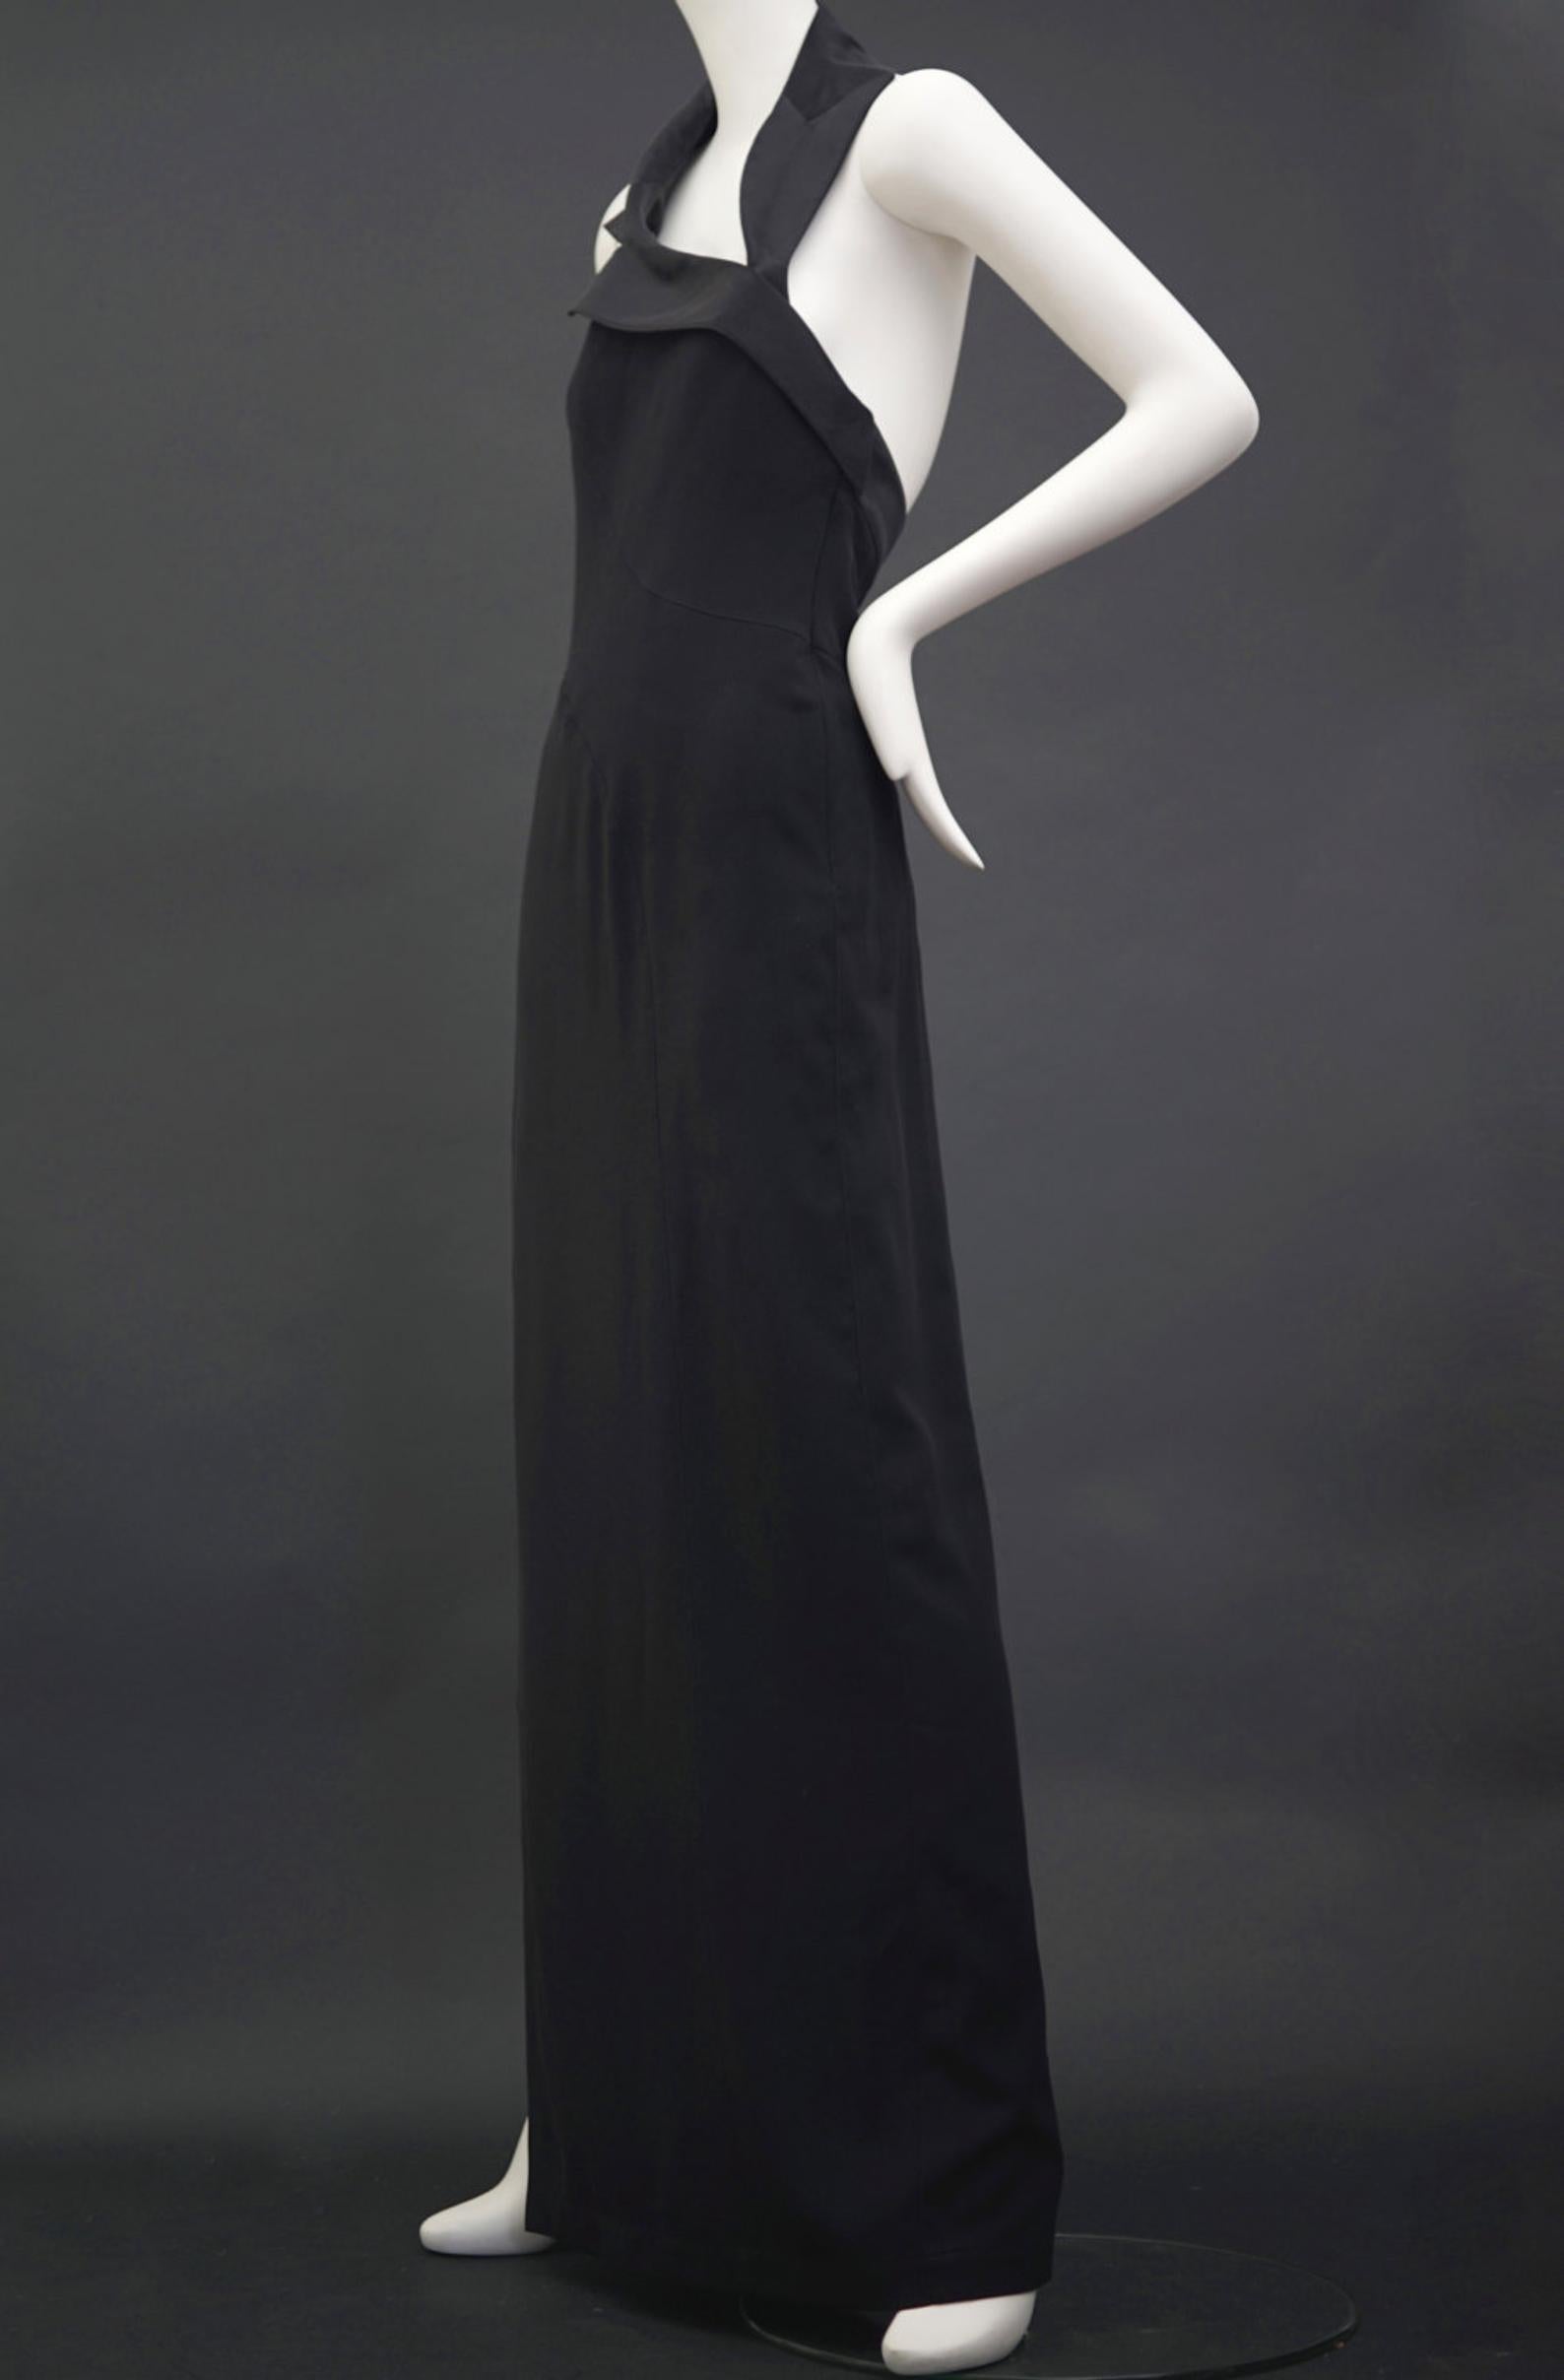 Vintage THIERRY MUGLER Asymmetric Collar Long Black Halter Evening Dress

Approximate measurements taken laid flat:
Bust: 34 inches
Waist: 28 inches
Hips: 38 inches
Length: 52 inches (armpit side to hem)

Features
- 100% Authentic THIERRY MUGLER.
-